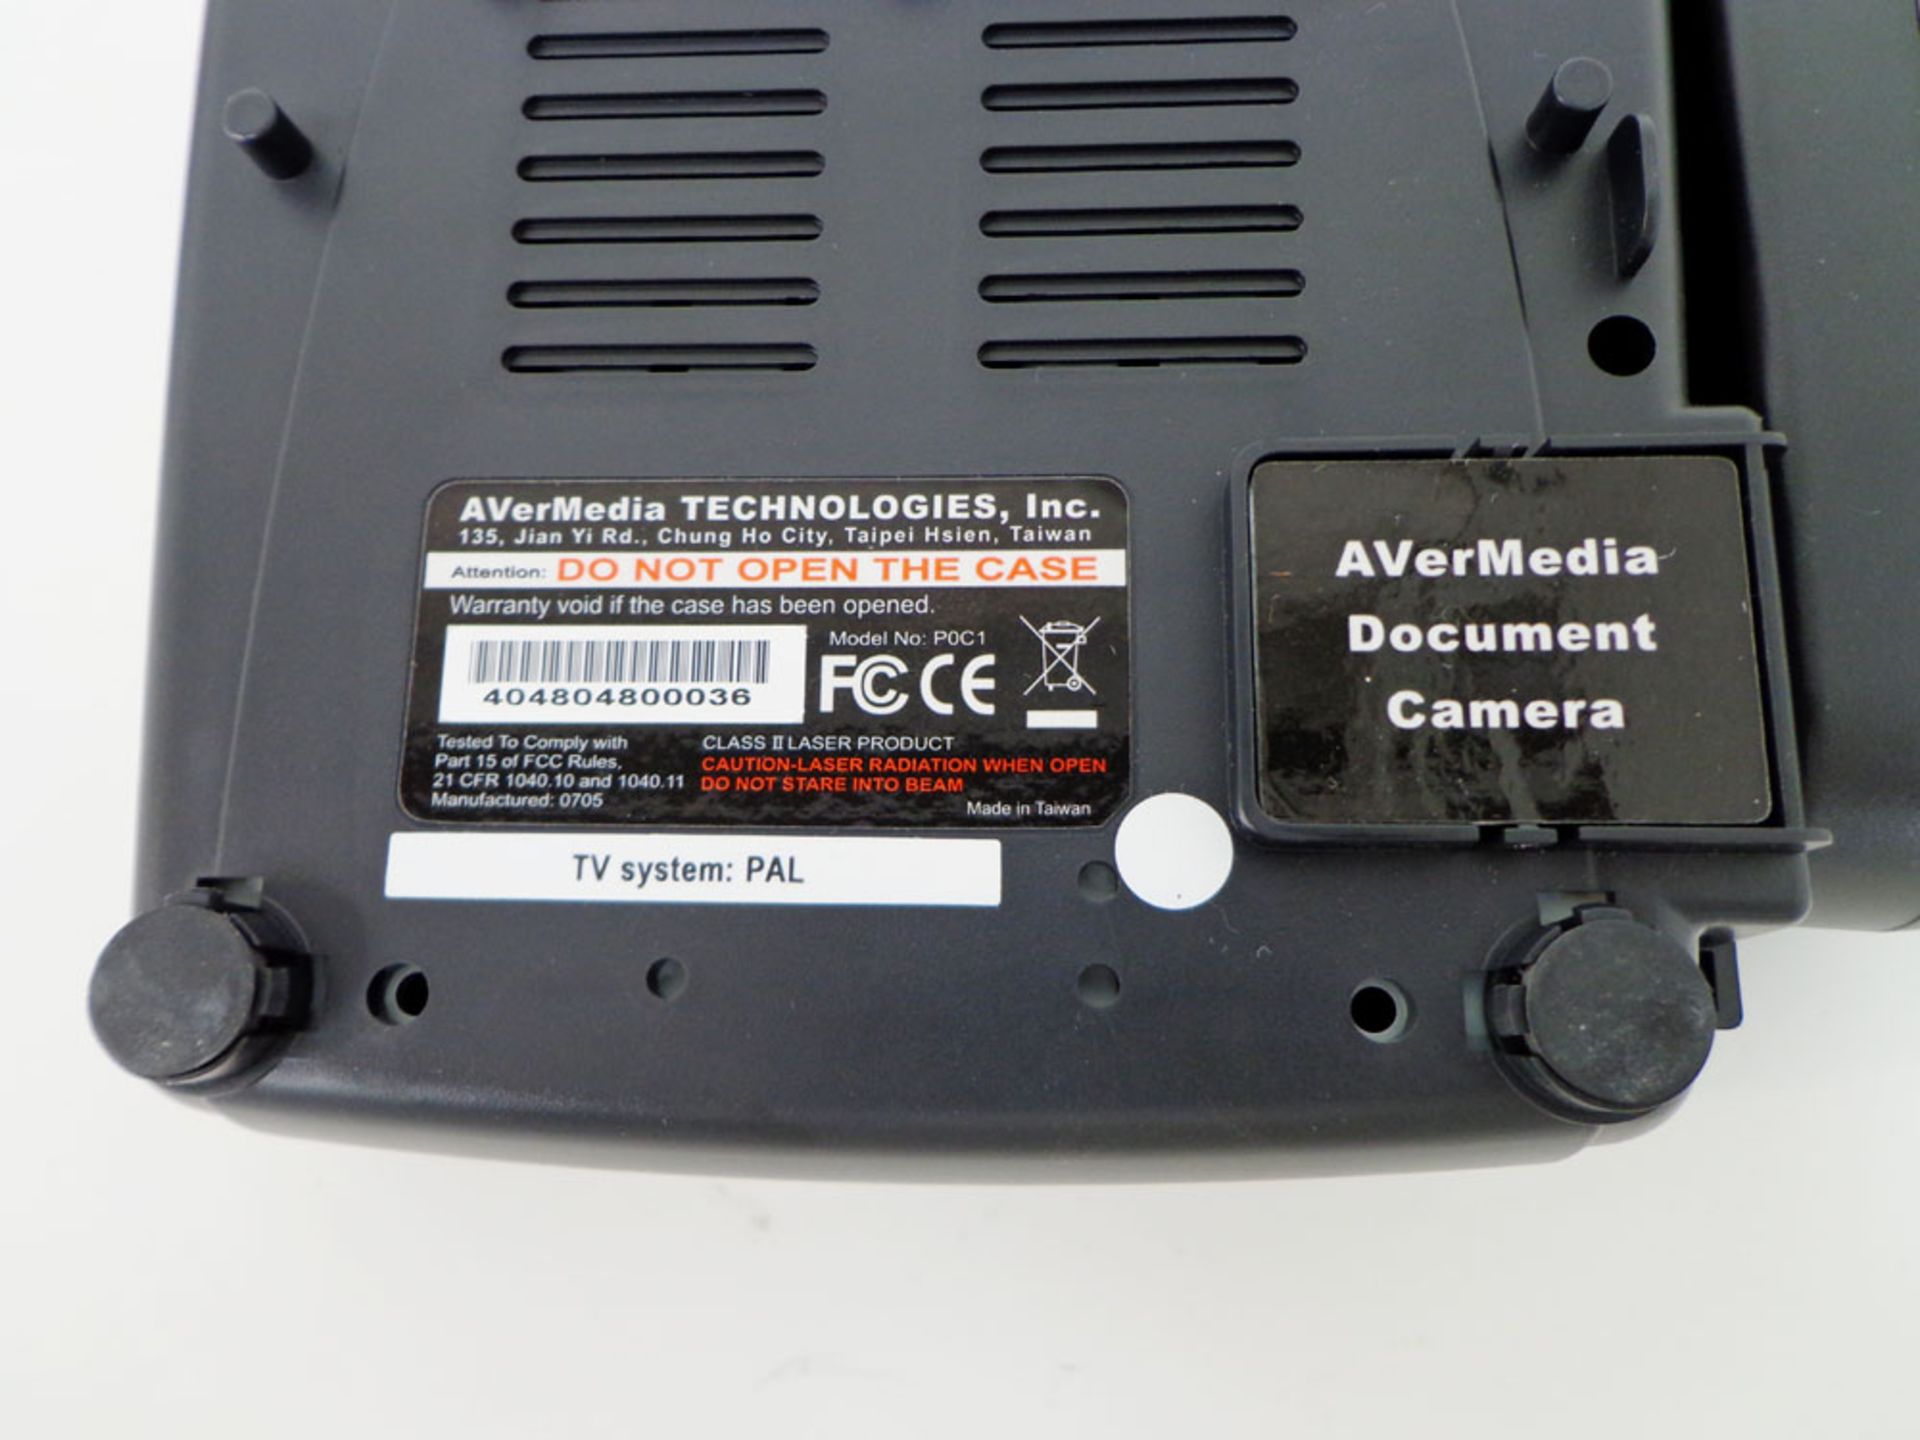 AverMedia AverVision 110 Document Camera, serial number 4048048000036 (Ref: WA12144) - Image 7 of 7